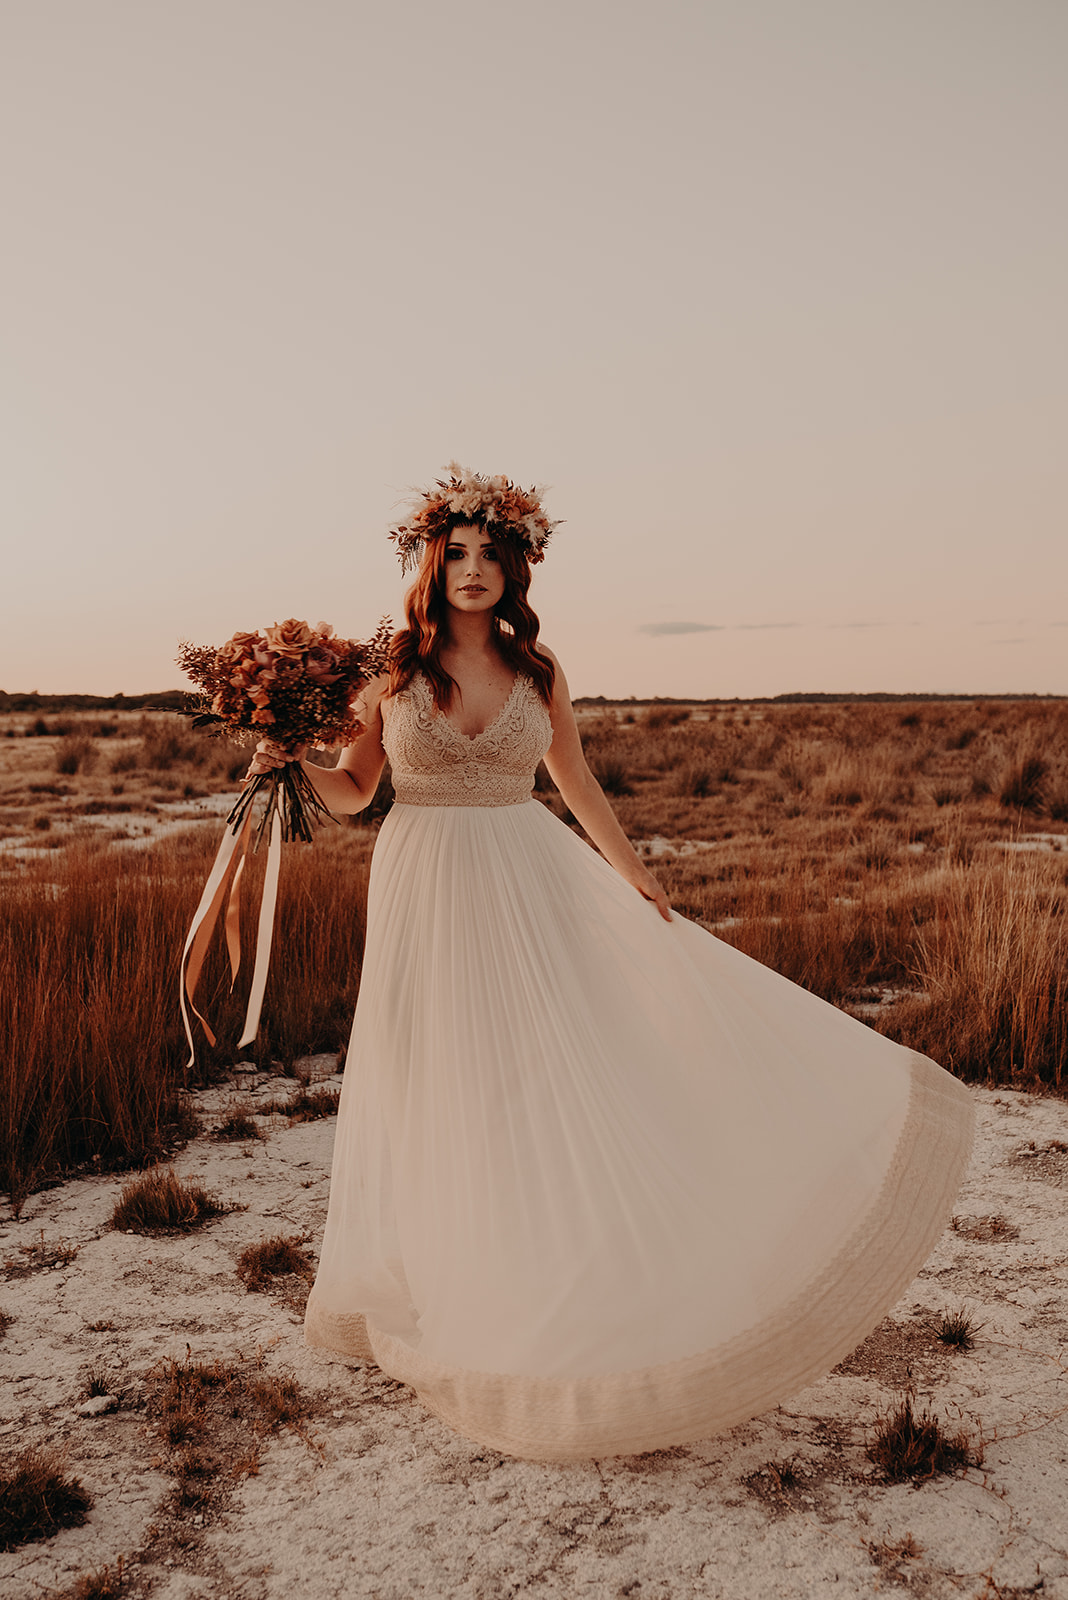 images by taylor maree photography zolotas australia wedding gowns bridal hair makeup bouquets